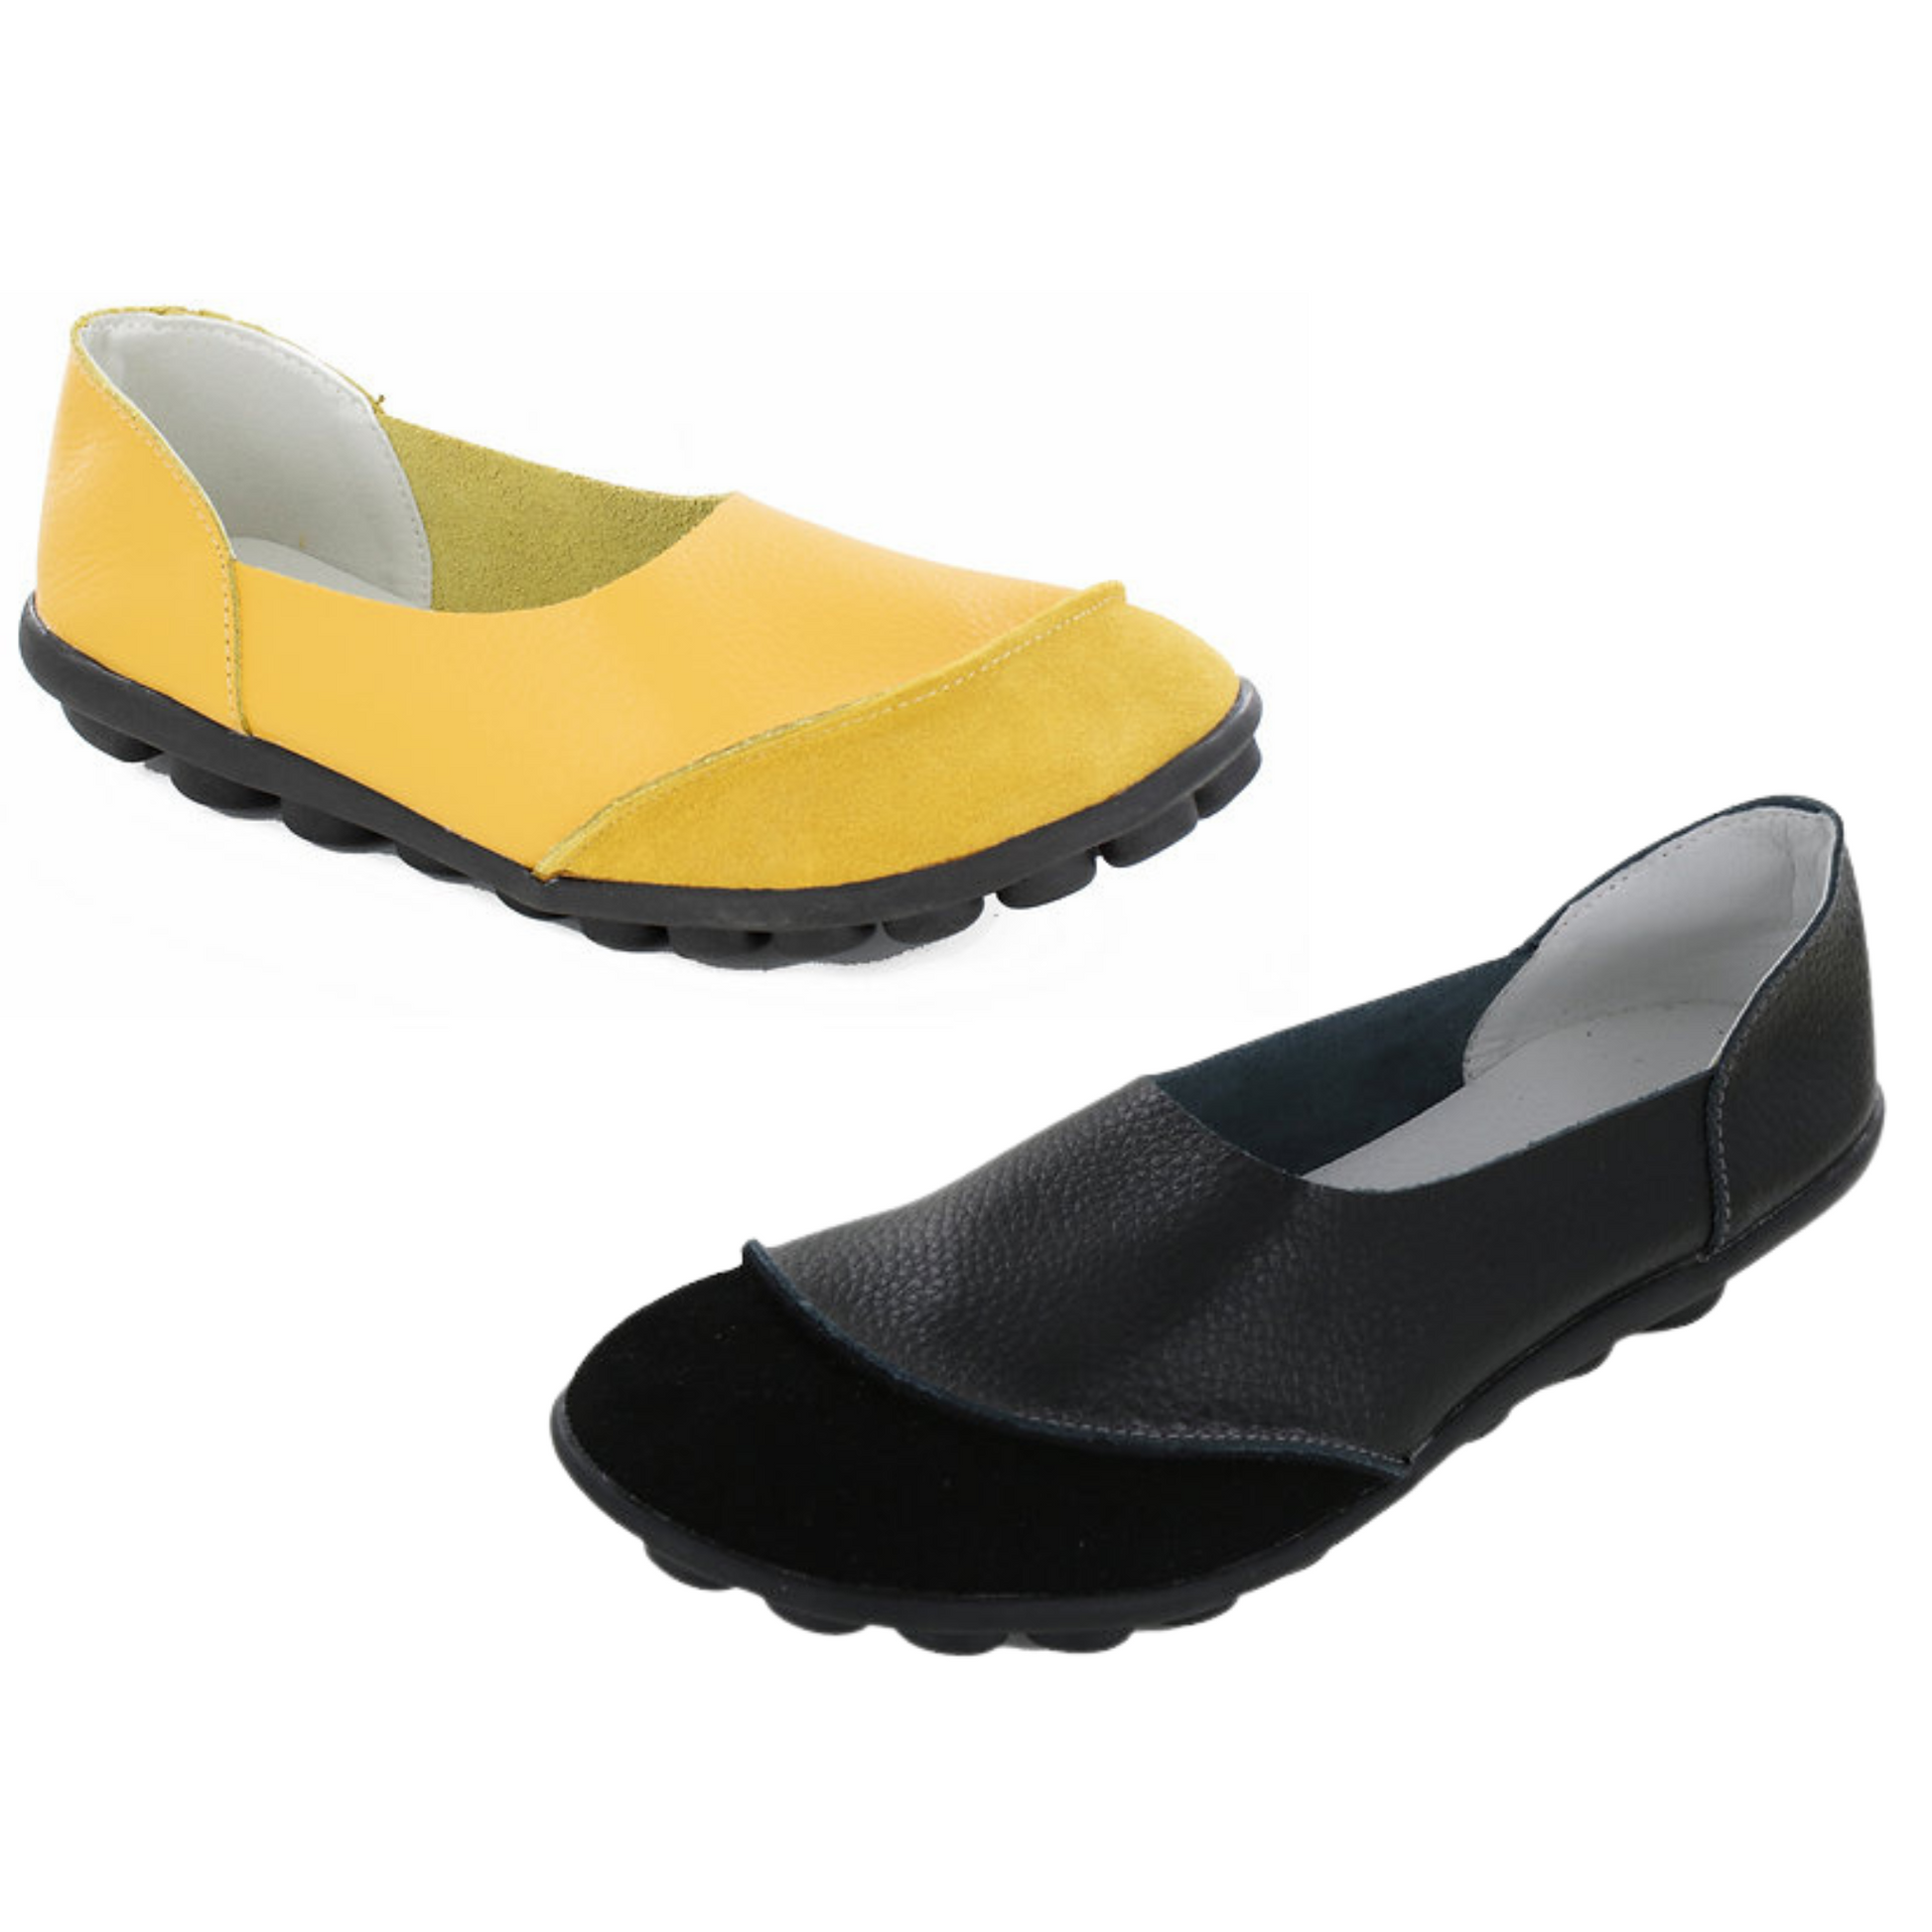 Update any look with a pair of these classic black or yellow leather shoes. Crafted with a closed toe, they provide a timeless, elegant look that works in any style. Perfect for casual and formal occasions.